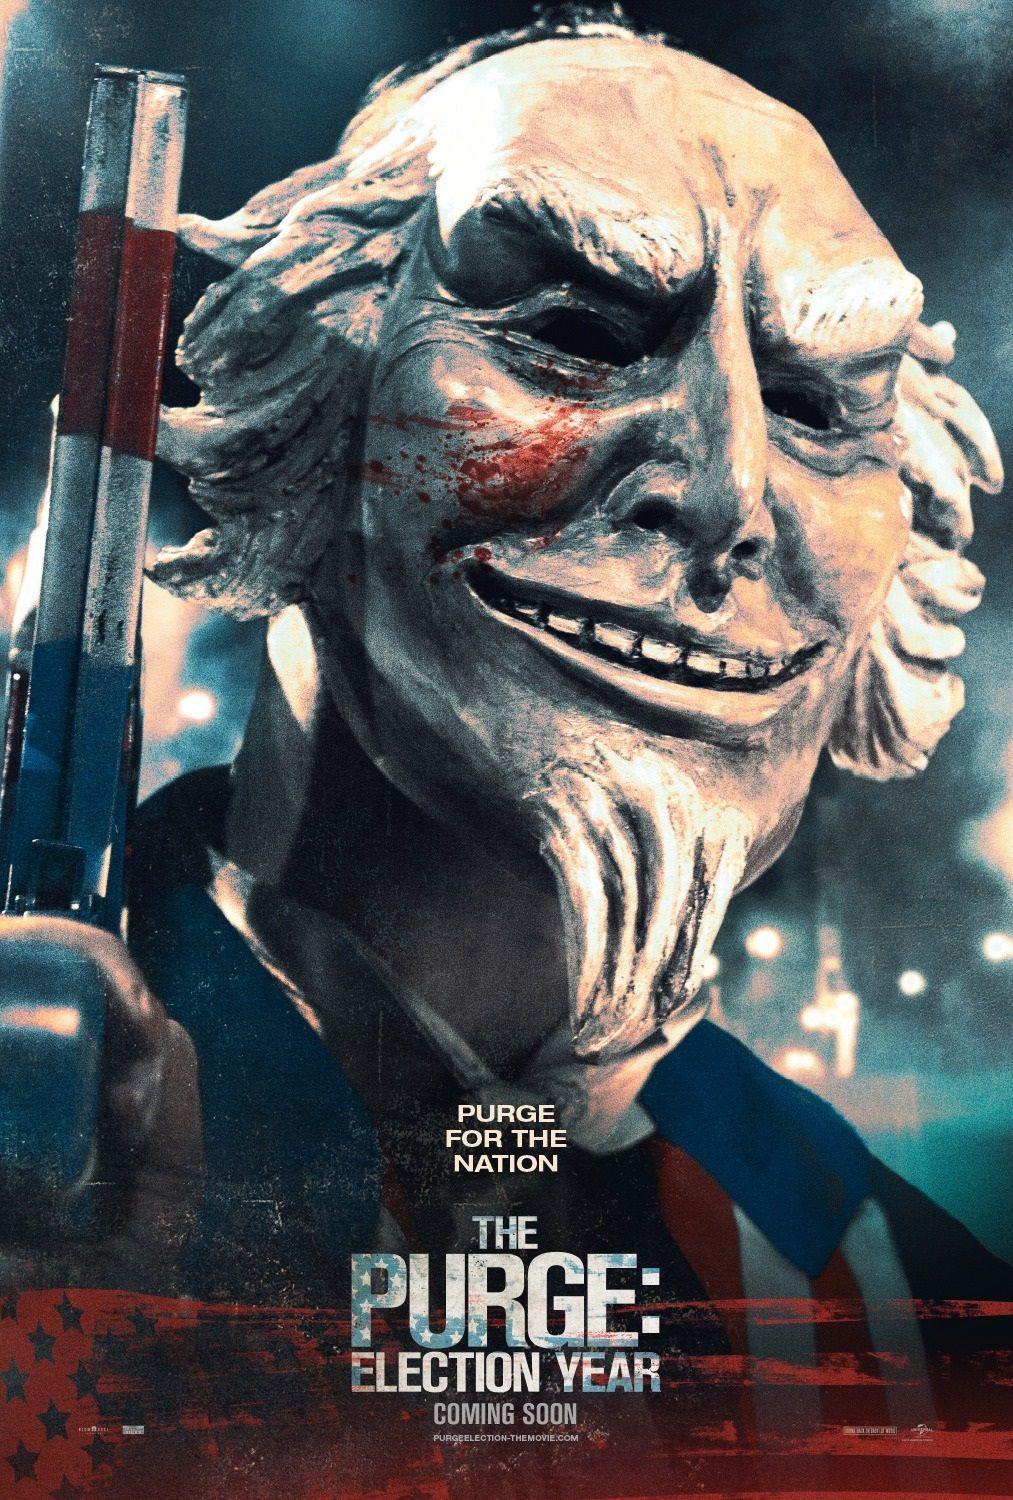 All Movie Posters and Prints for The Purge: Election Year. JoBlo